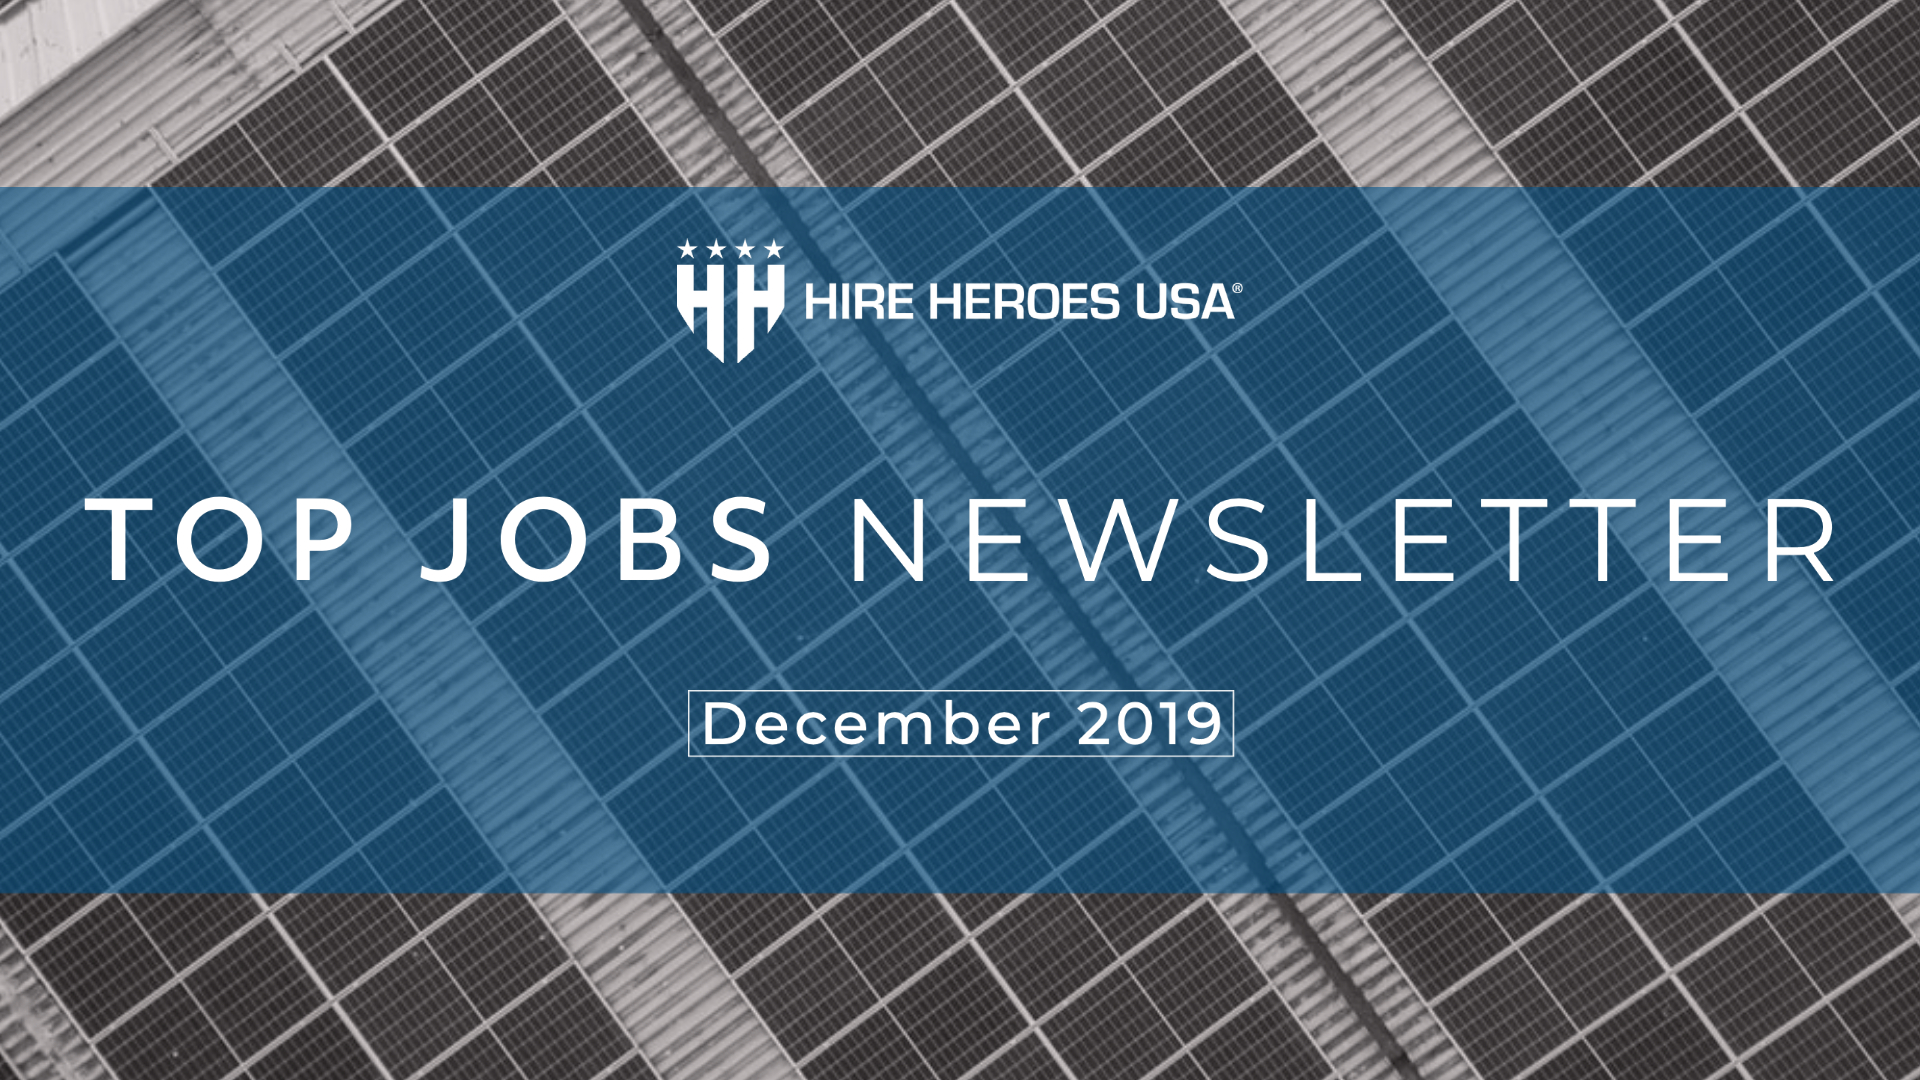 Top Jobs for the Month of December 2019